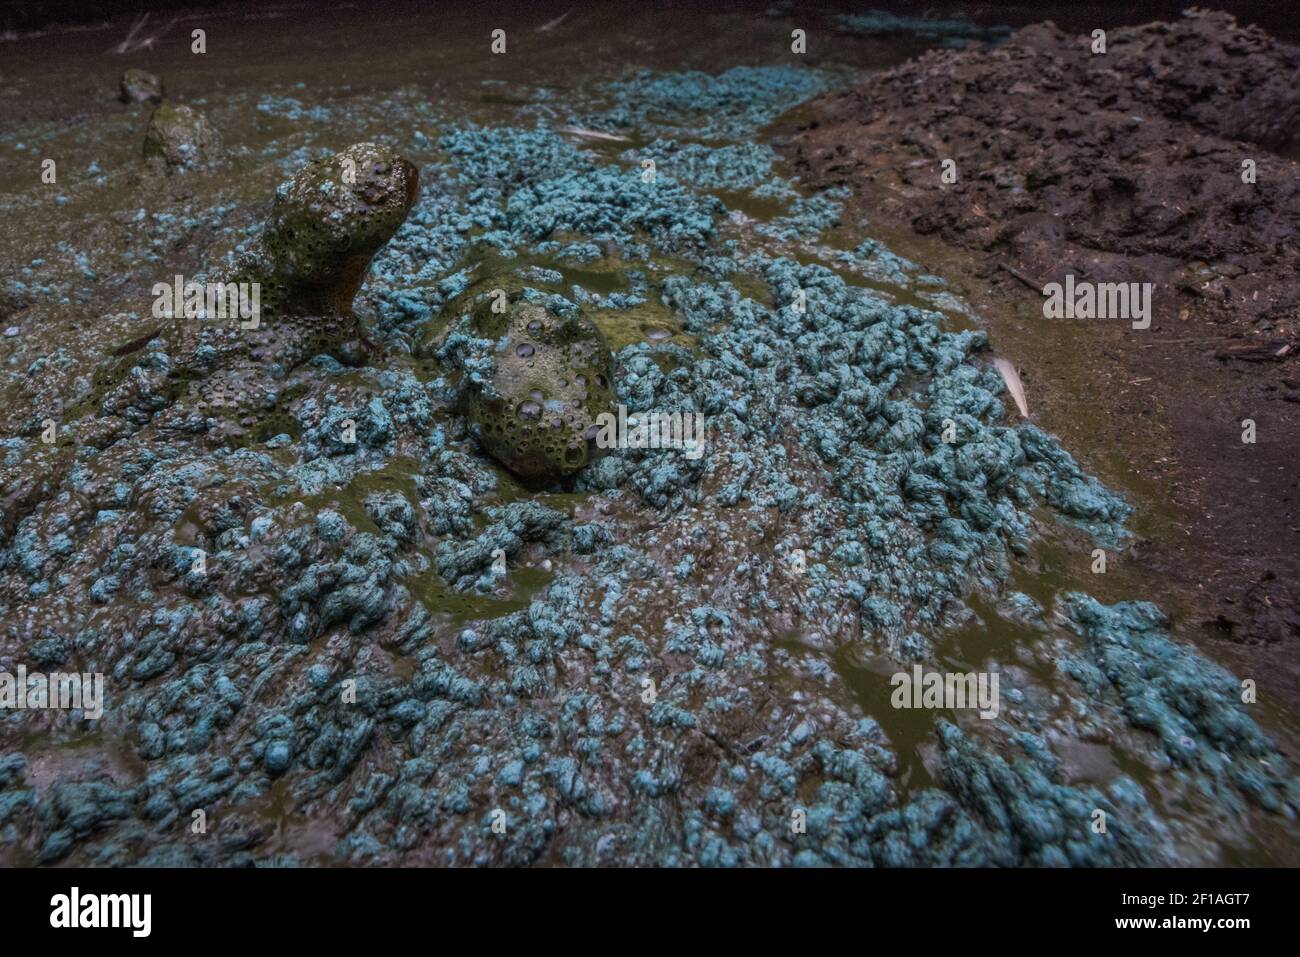 A blooming blue green algae in a cattle pond in Northern California, these cyanobacteria blooms create dangerous toxins and unsafe water conditions. Stock Photo